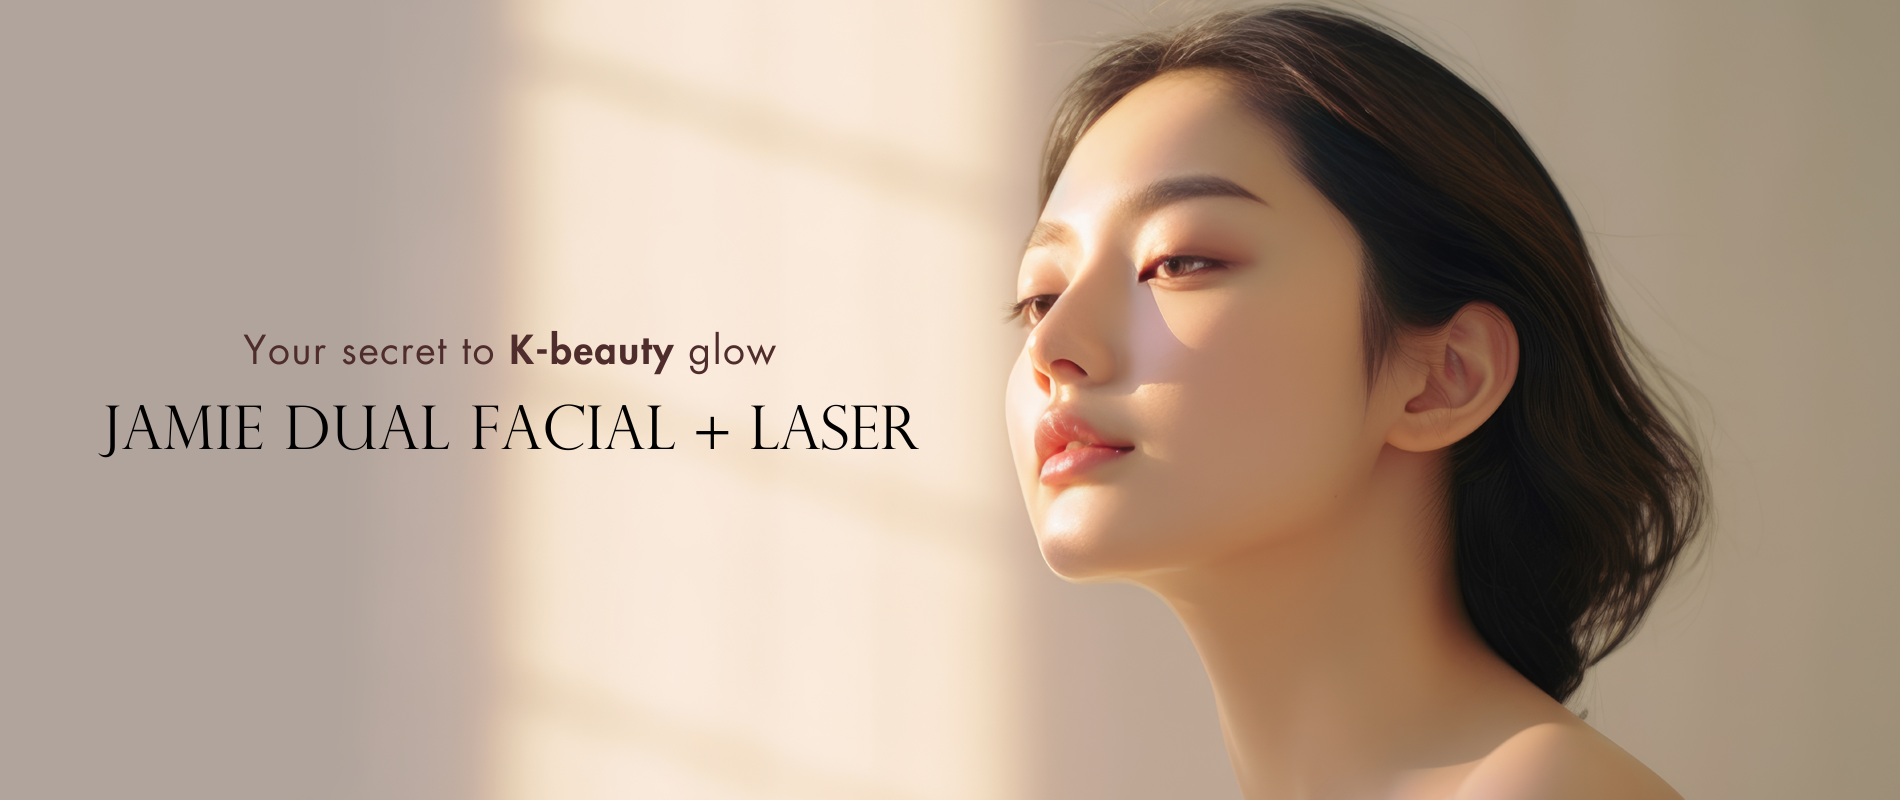 Spring into radiance experience the jamie dual facial laser special 7df45c02 8685 4447 b81d 5f78ee263033